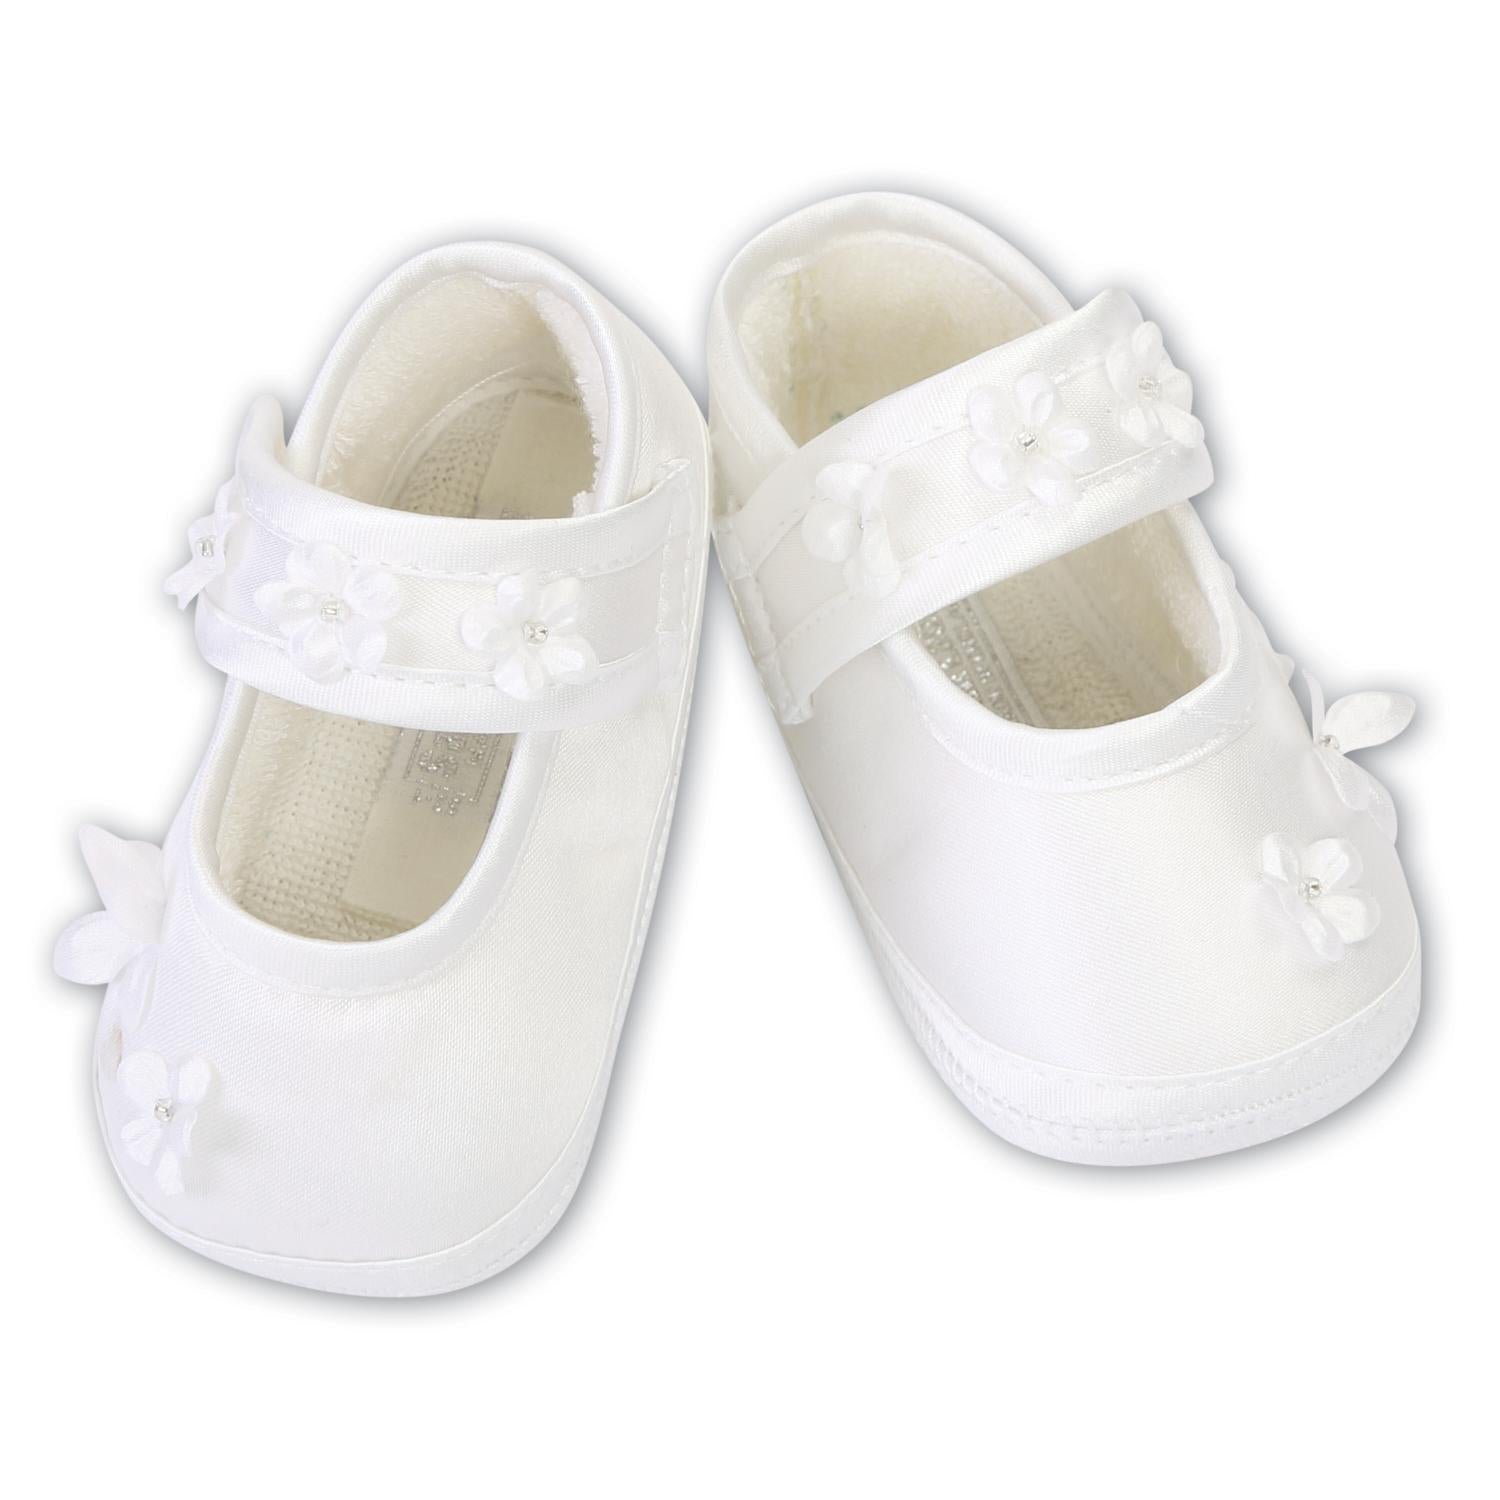 SARAH LOUISE SOFT SOLE CHRISTENING SHOES 4437W